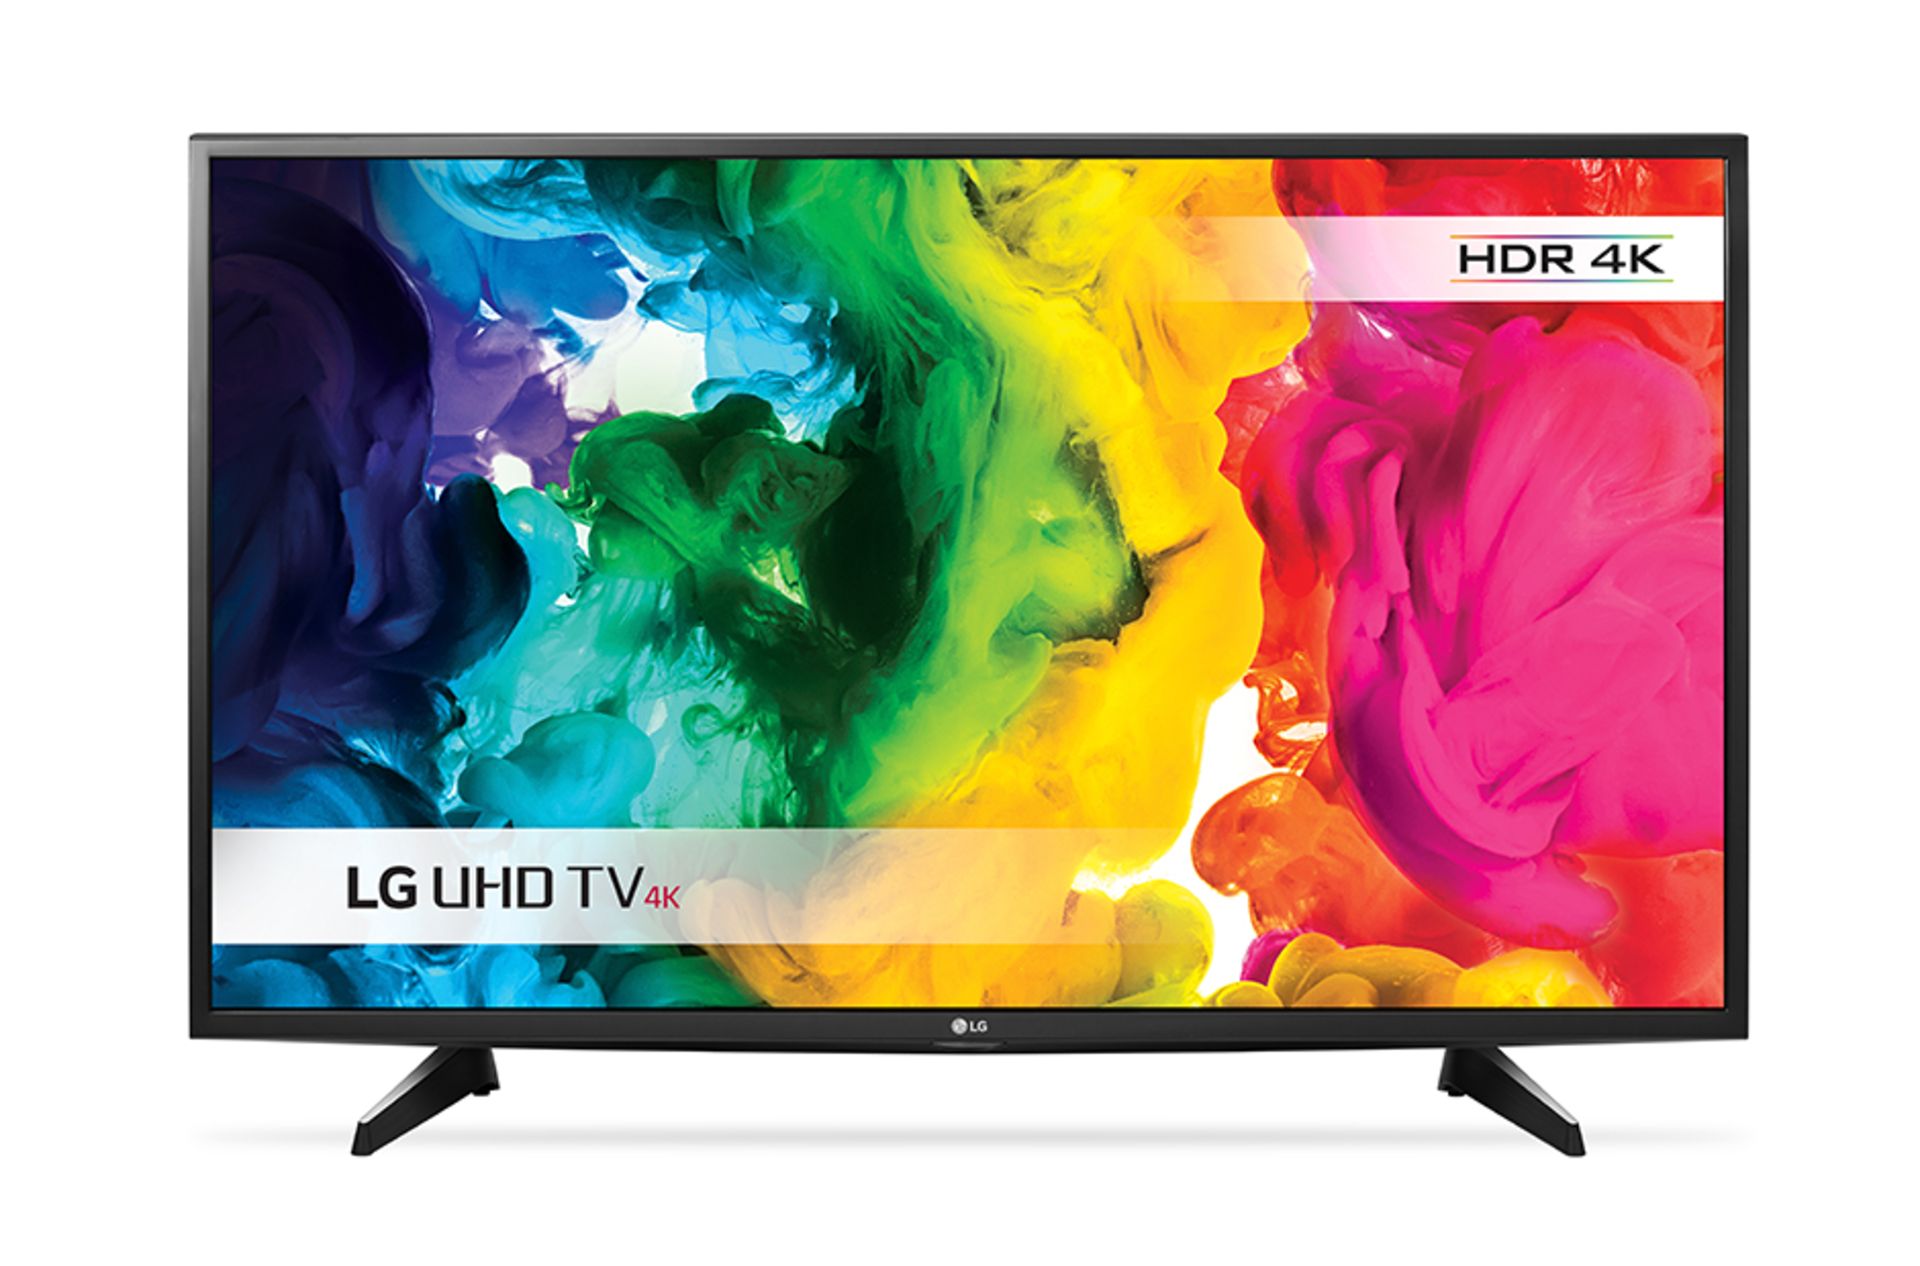 V Grade A LG 49 Inch HDR 4K ULTRA HD LED SMART TV WITH FREEVIEW HD & WEBOS 3.0 & WIFI 49UH610V